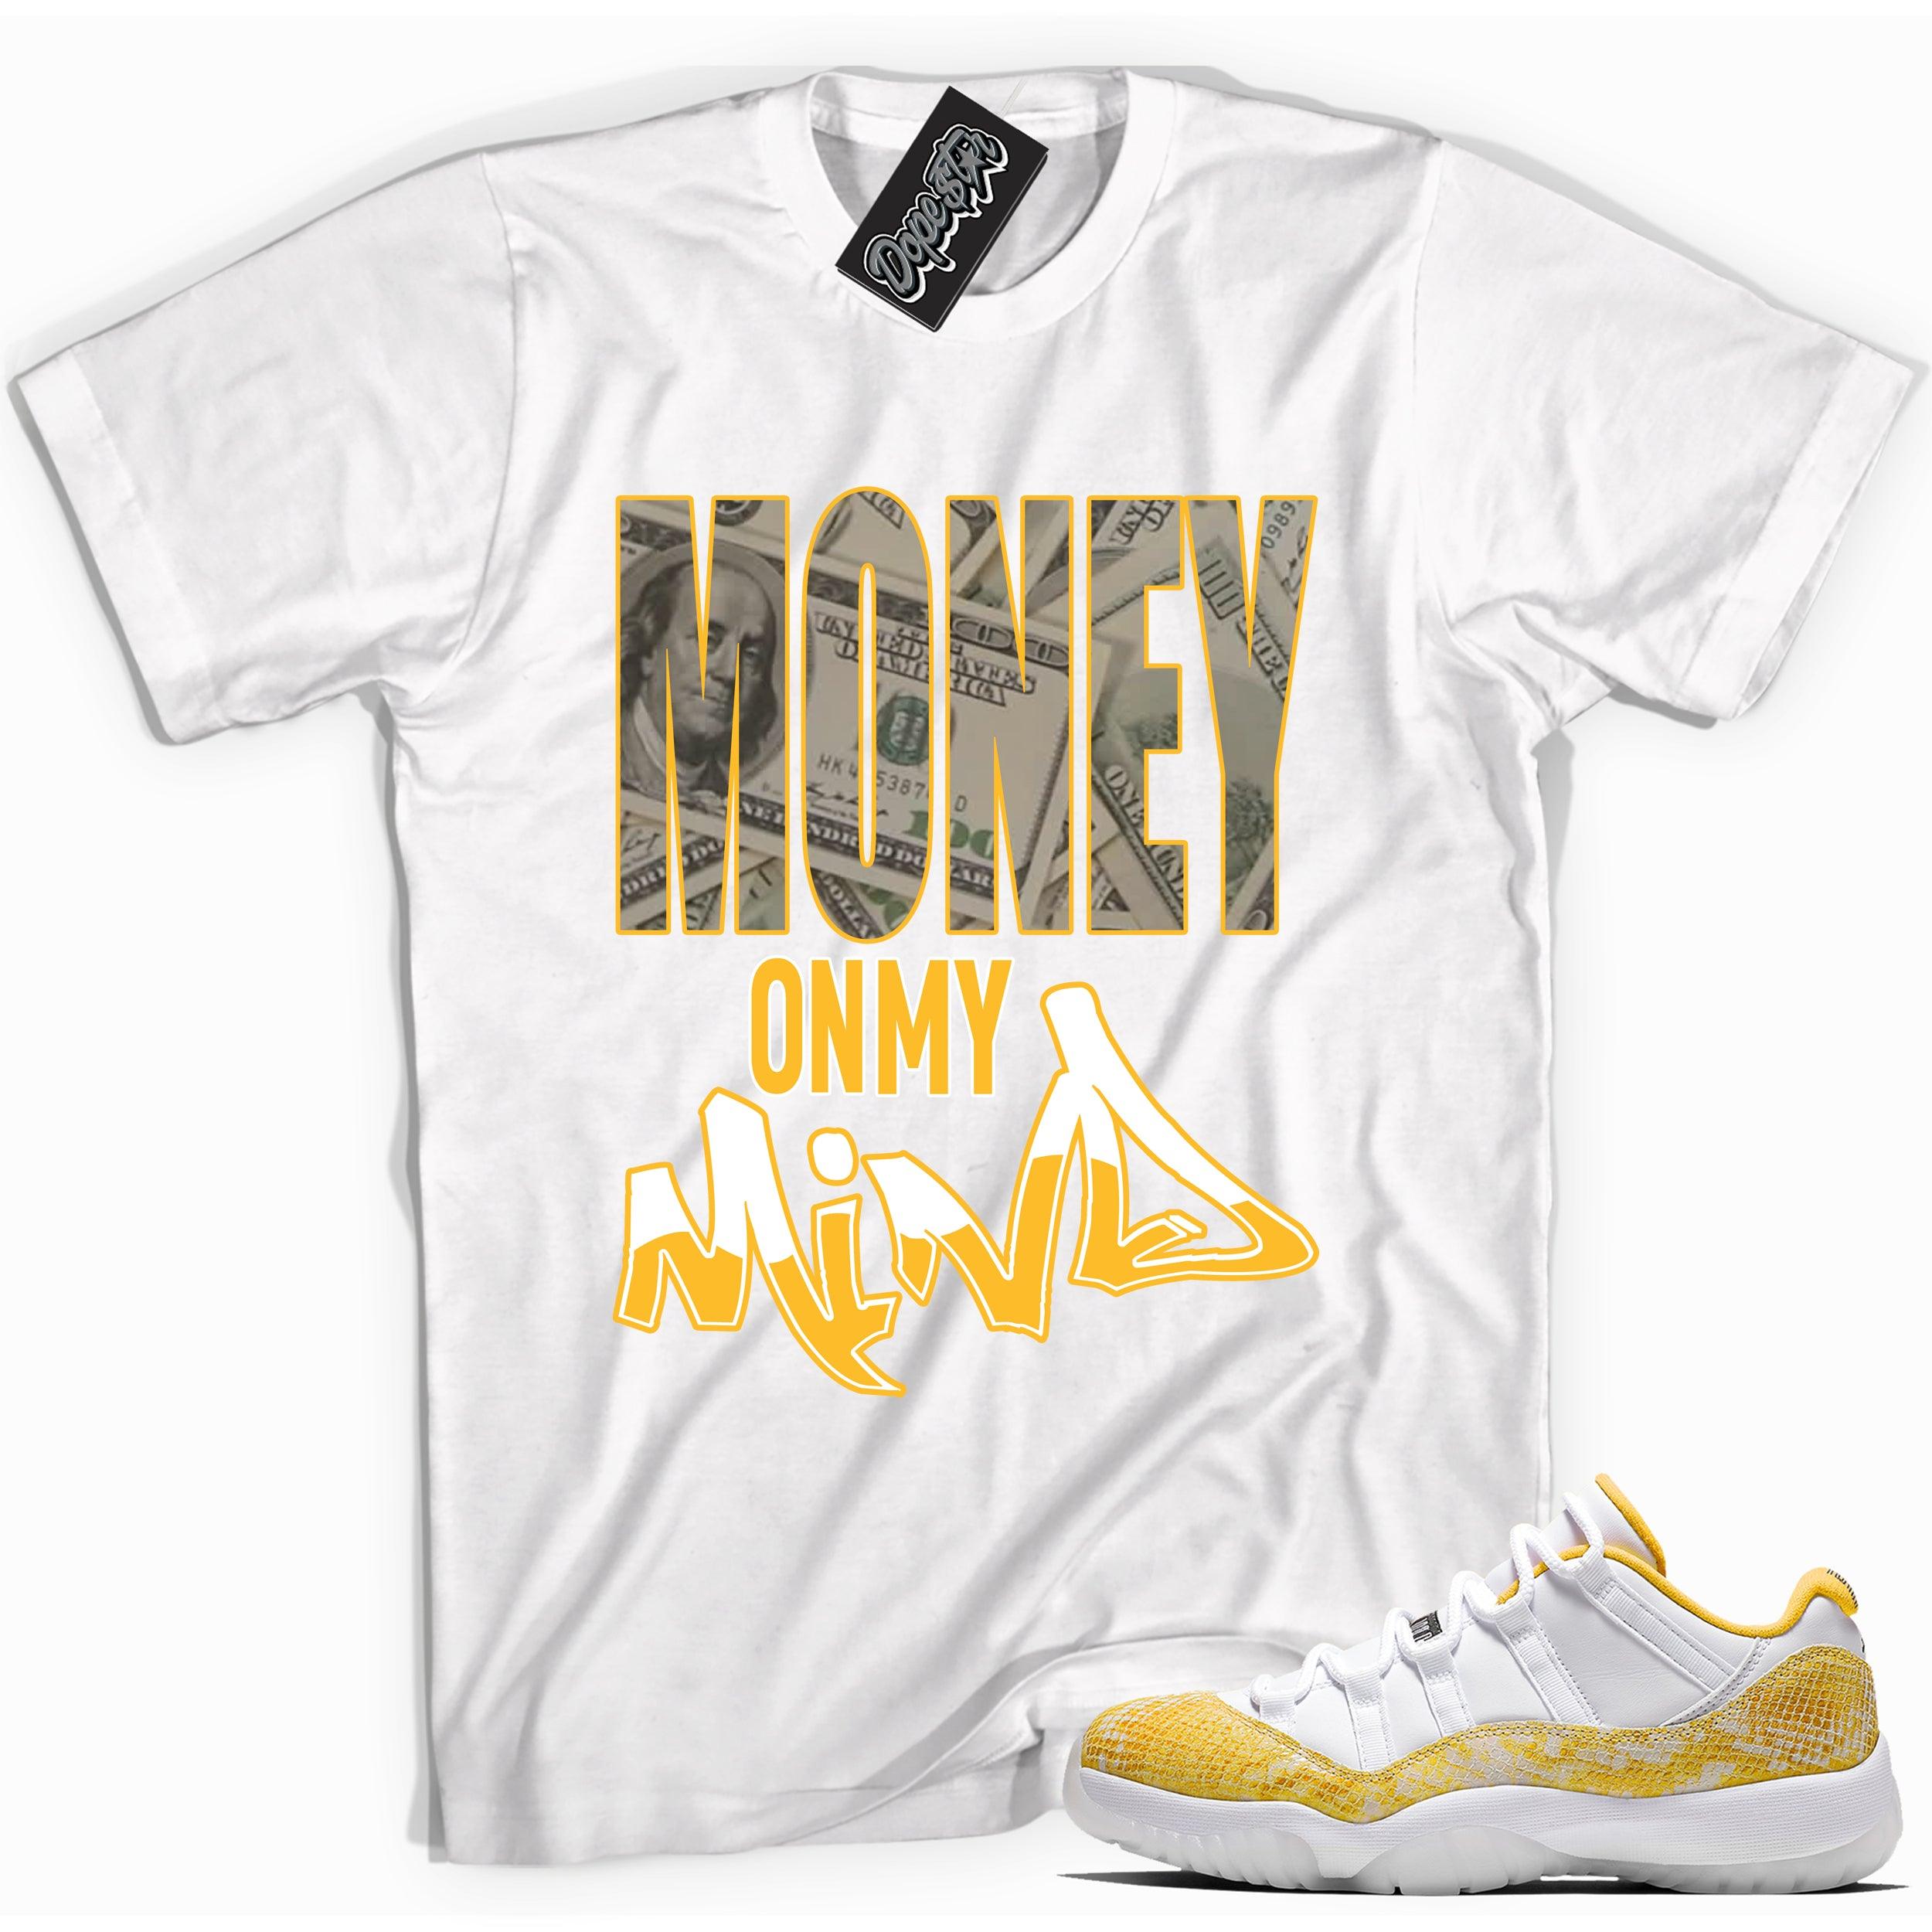 Cool white graphic tee with 'money on my mind' print, that perfectly matches Air Jordan 11 Low Yellow Snakeskin sneakers